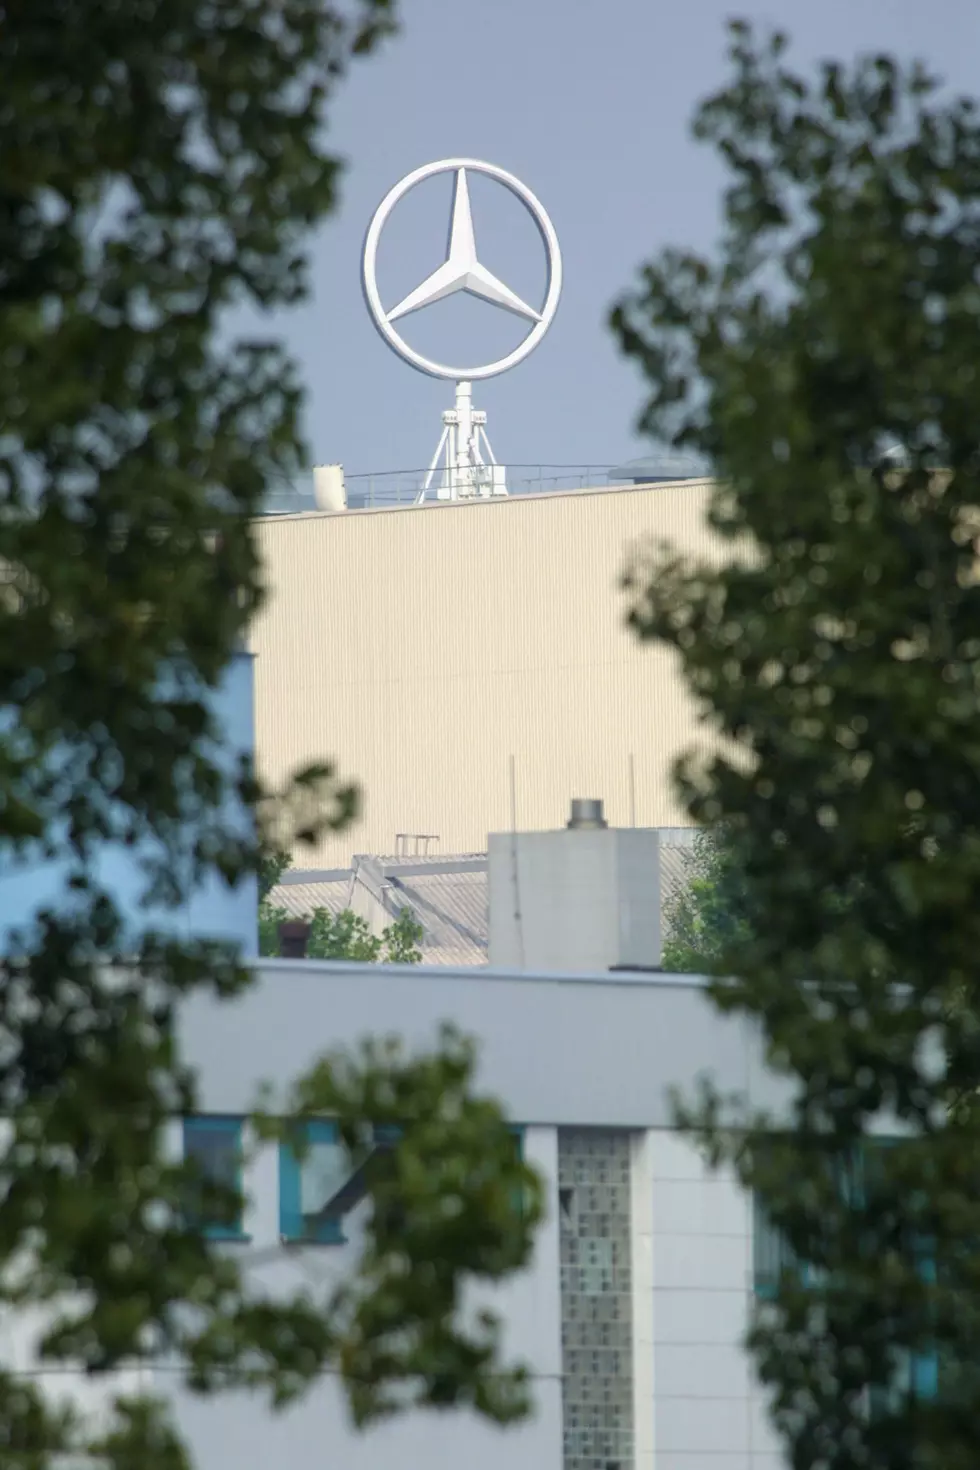 Construction Worker Dies After Fall At Mercedes Plant